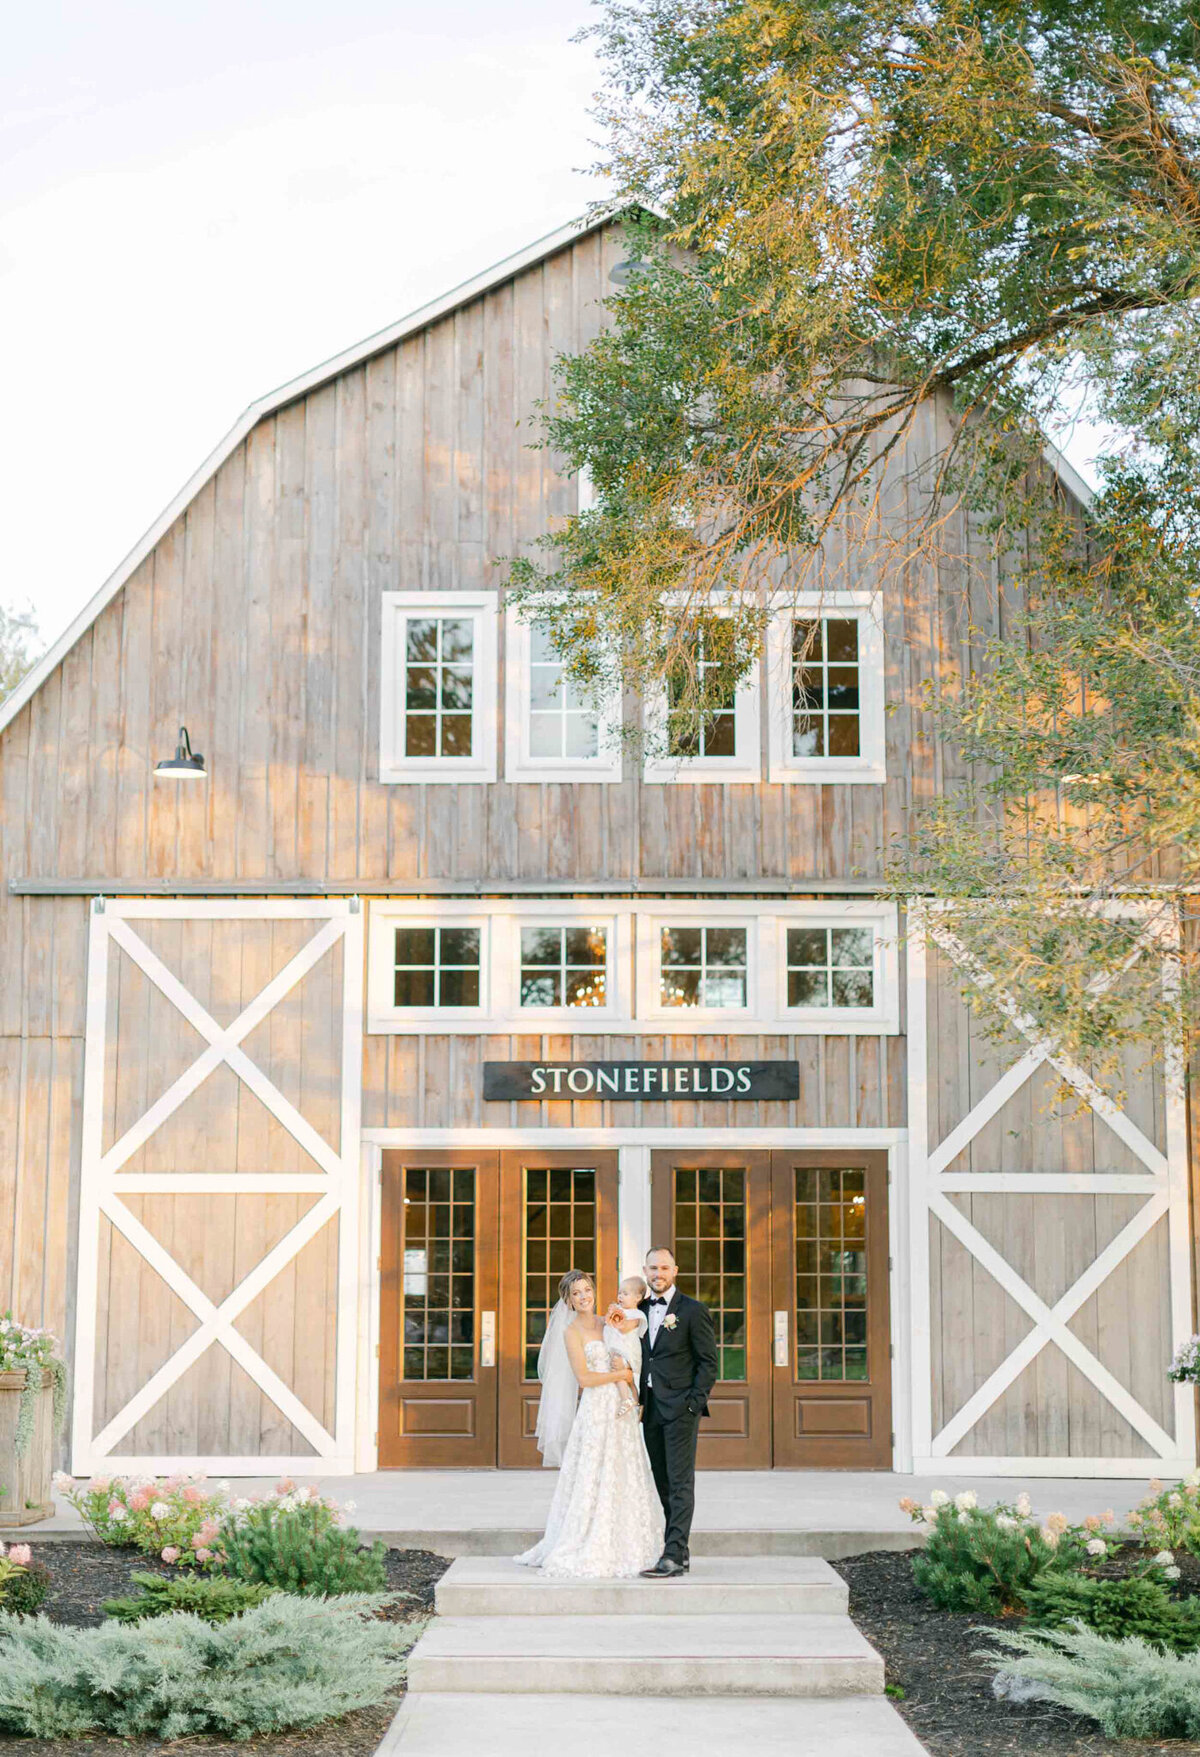 Couple in front of Stonefields captured by Megan Renee Photography, classic and romantic wedding photographer in Calgary, Alberta. Featured on the Bronte Bride Vendor Guide.